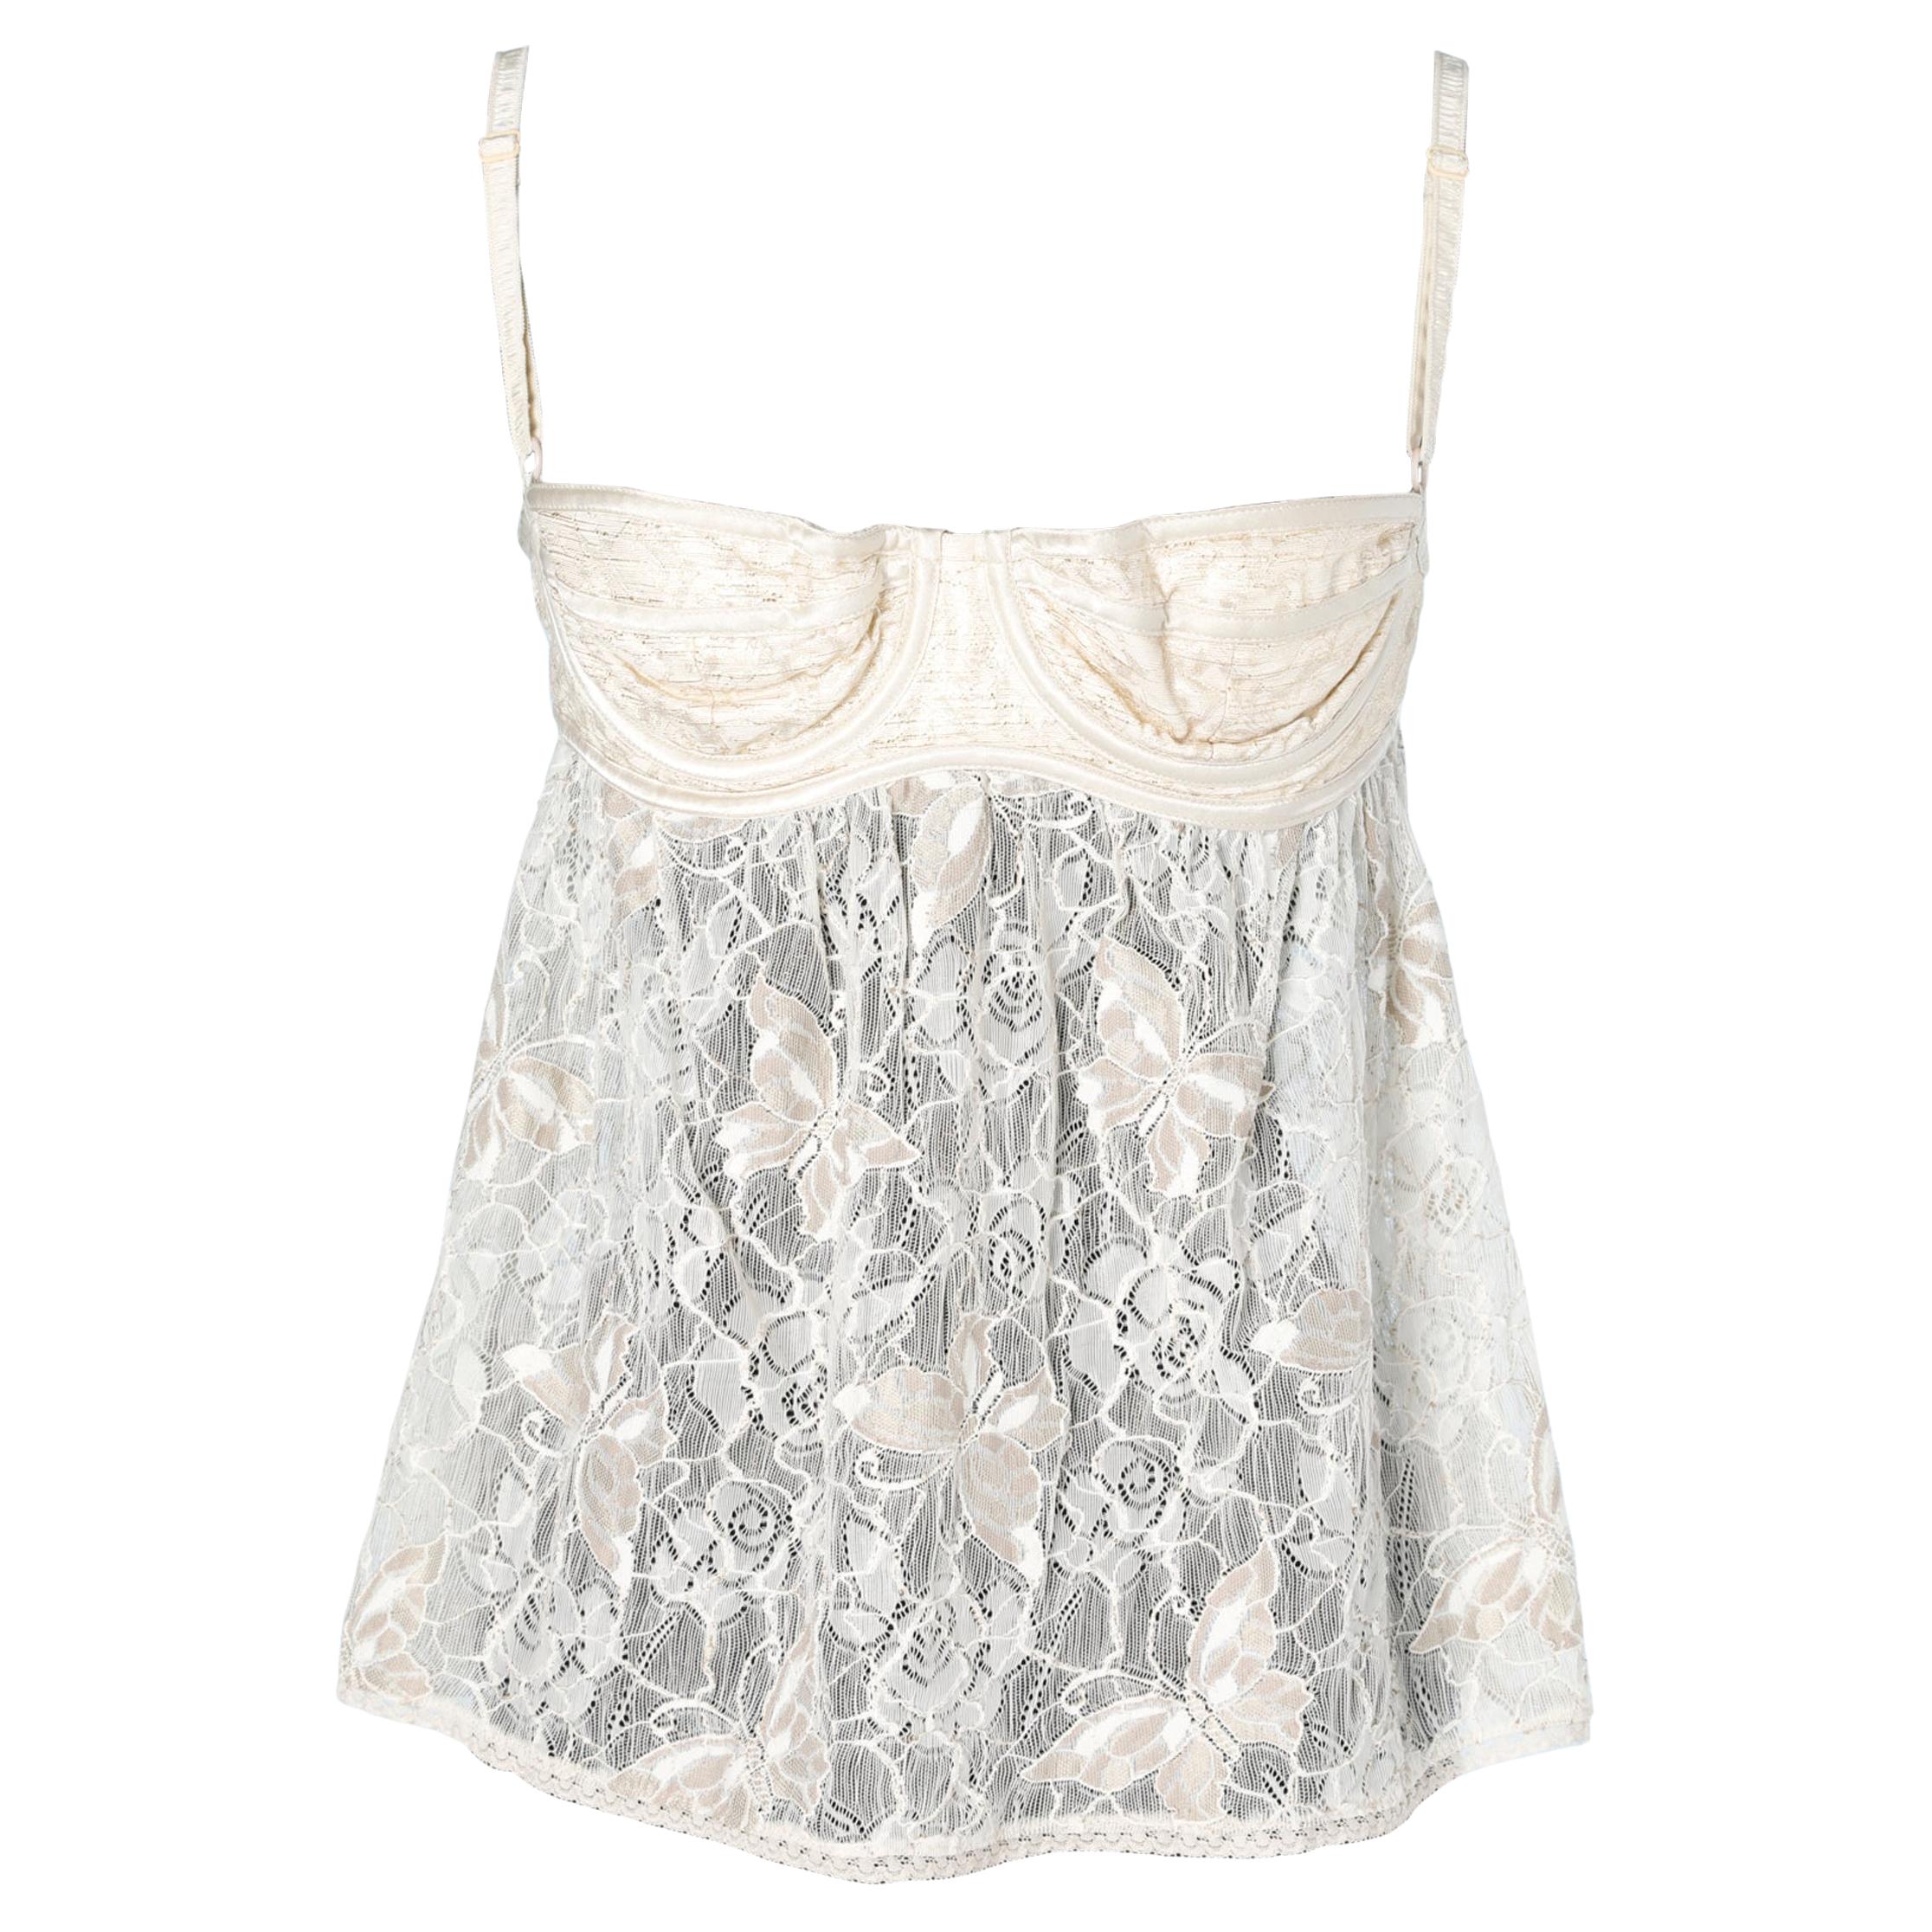 Lace off- white and gold  Bustier D&G by Dolce &Gabbana 